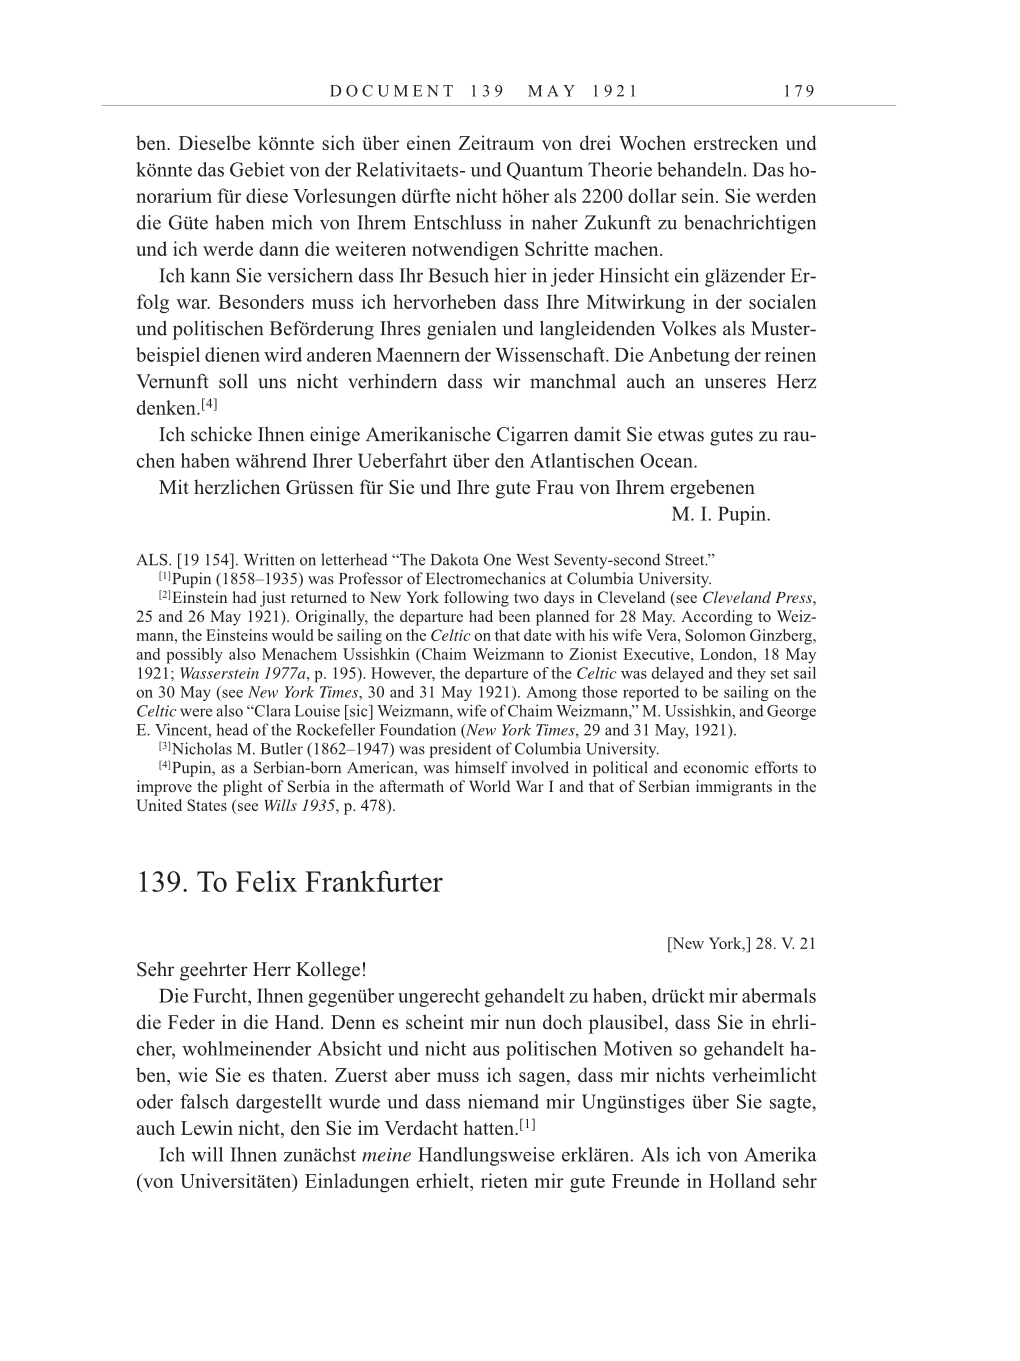 Volume 12: The Berlin Years: Correspondence January-December 1921 page 179